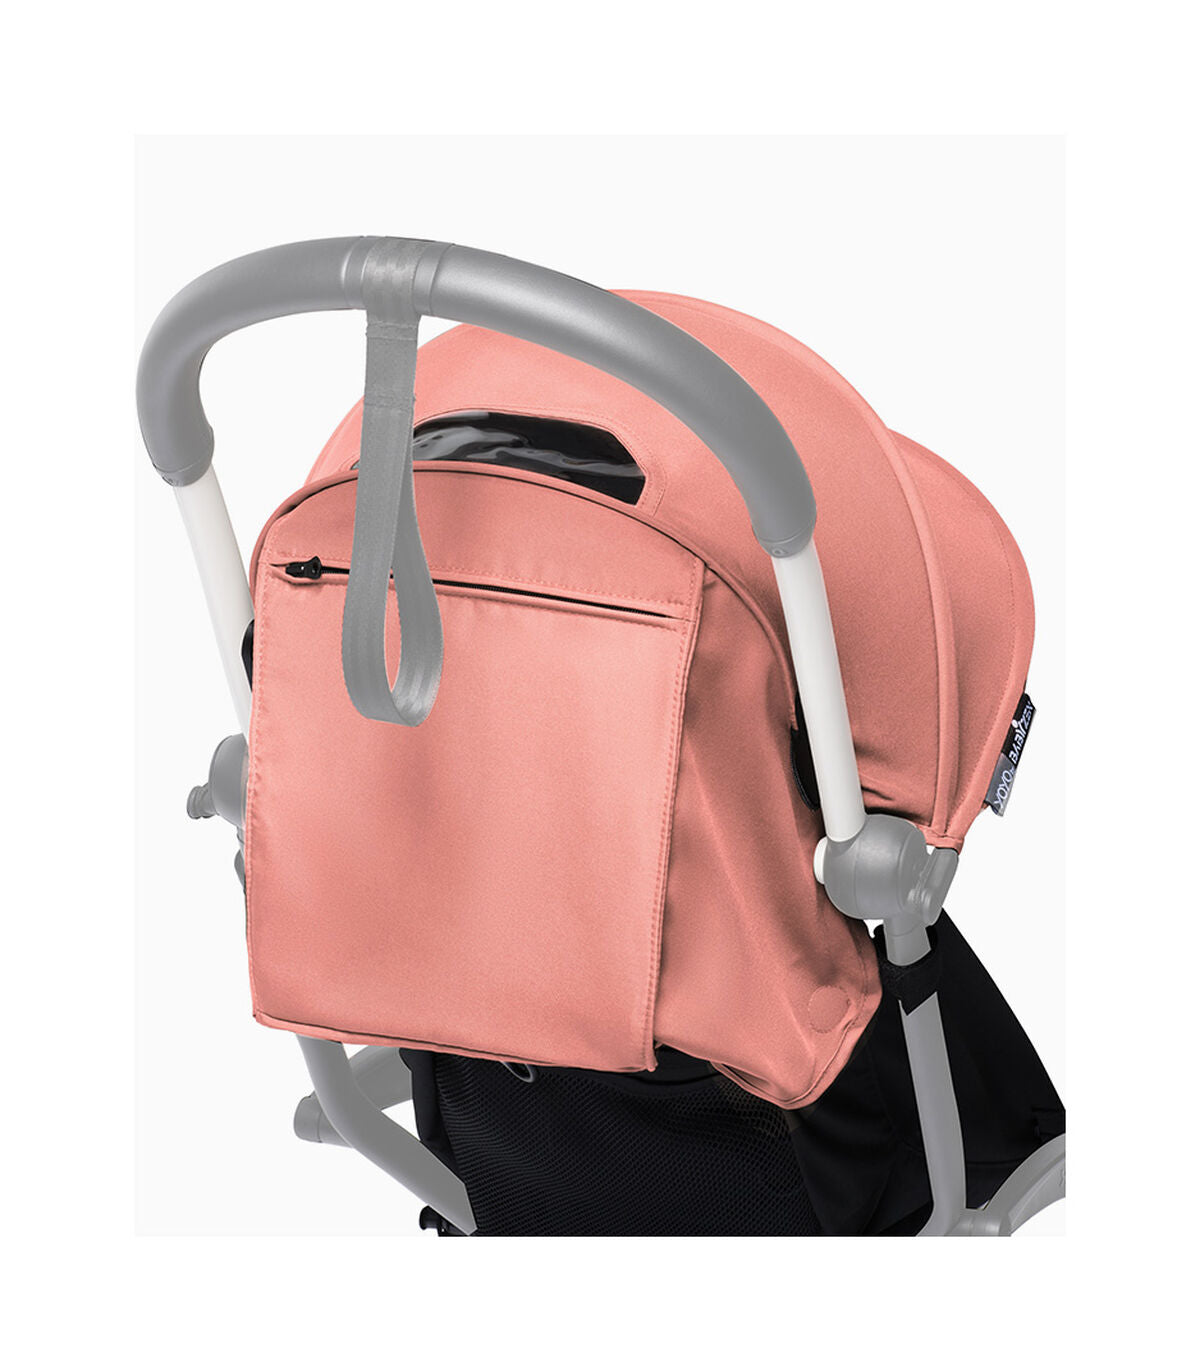 Stokke® YOYO® 6+ color pack (Without Yoyo Frame & Harness)